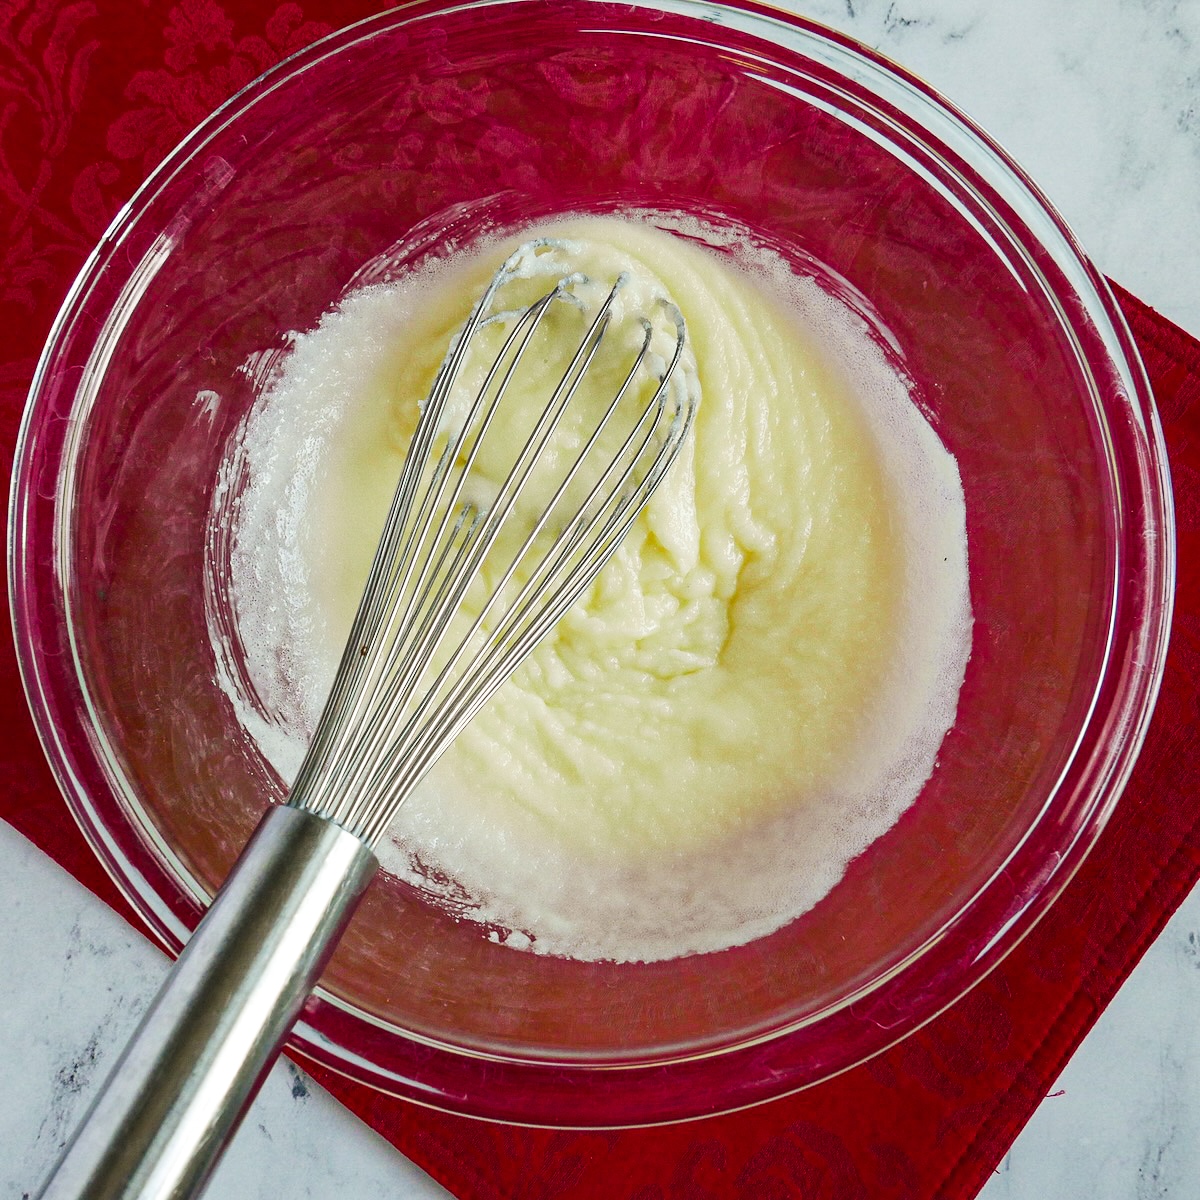 Granulated sugar whisked into a bowl of melted butter.